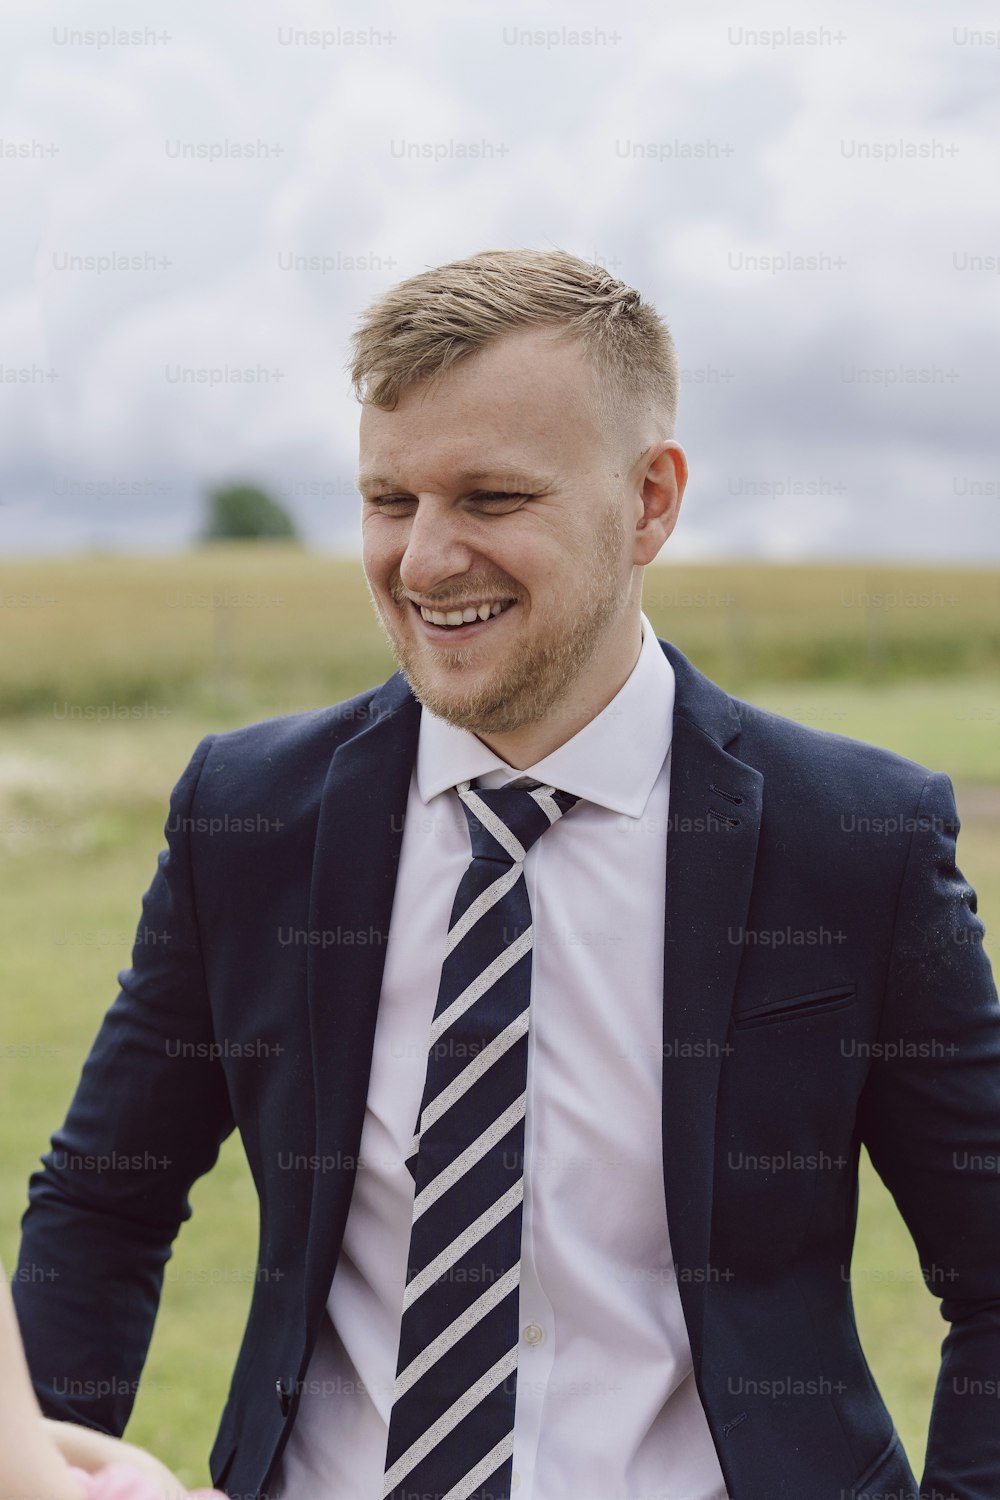 a man in a suit and tie standing in a field